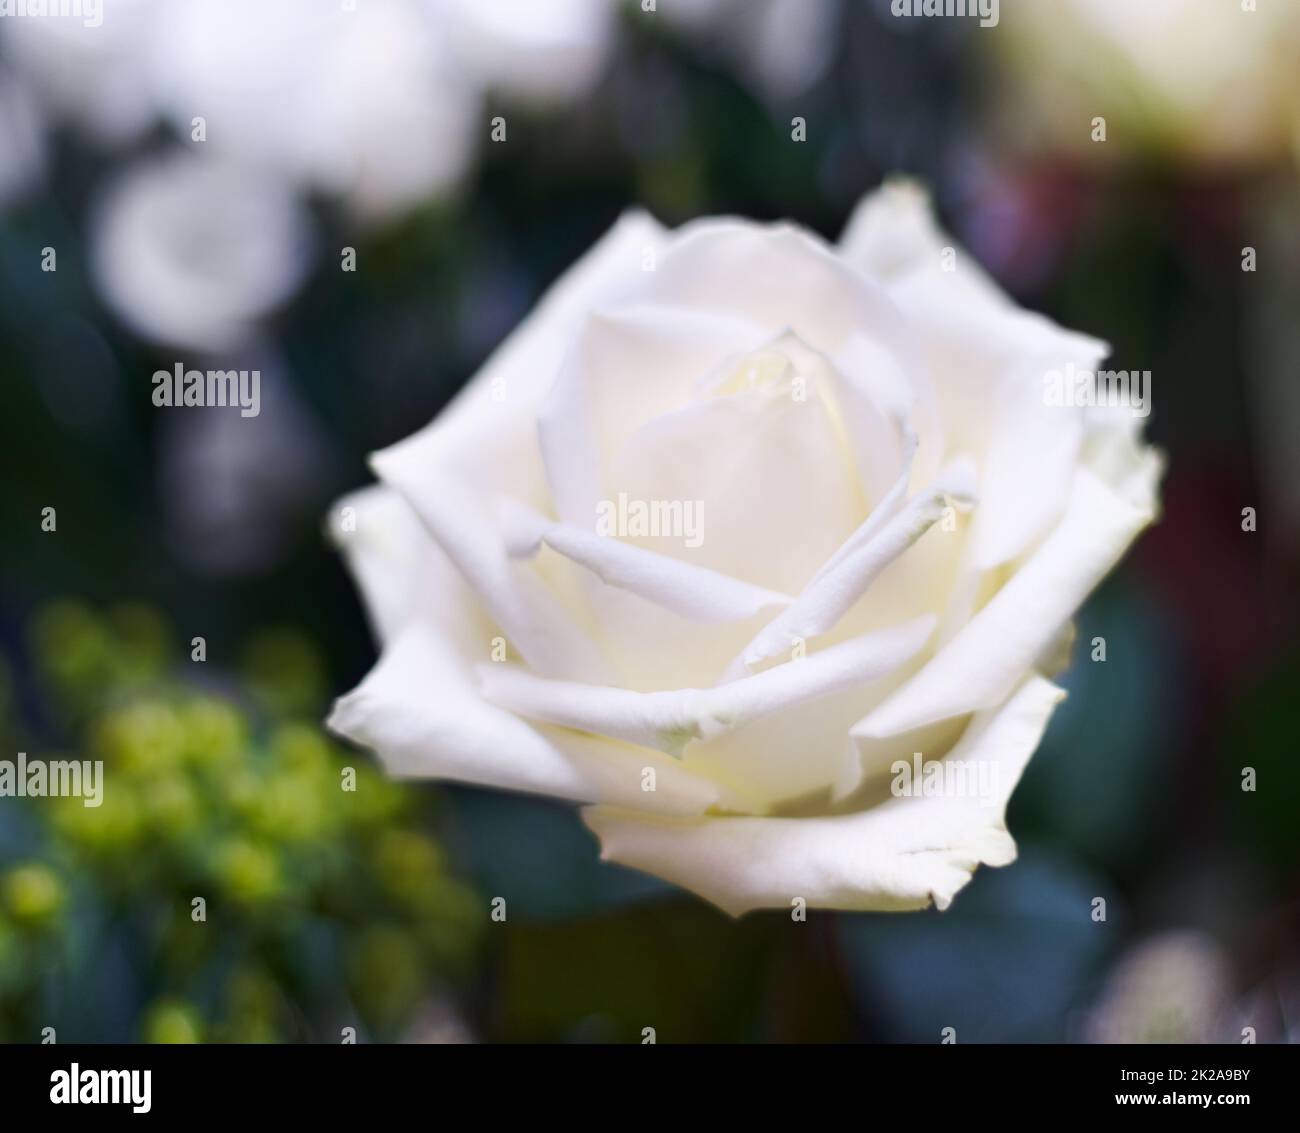 Picture of innocence. A close-up photo of a fresh white rose. Stock Photo